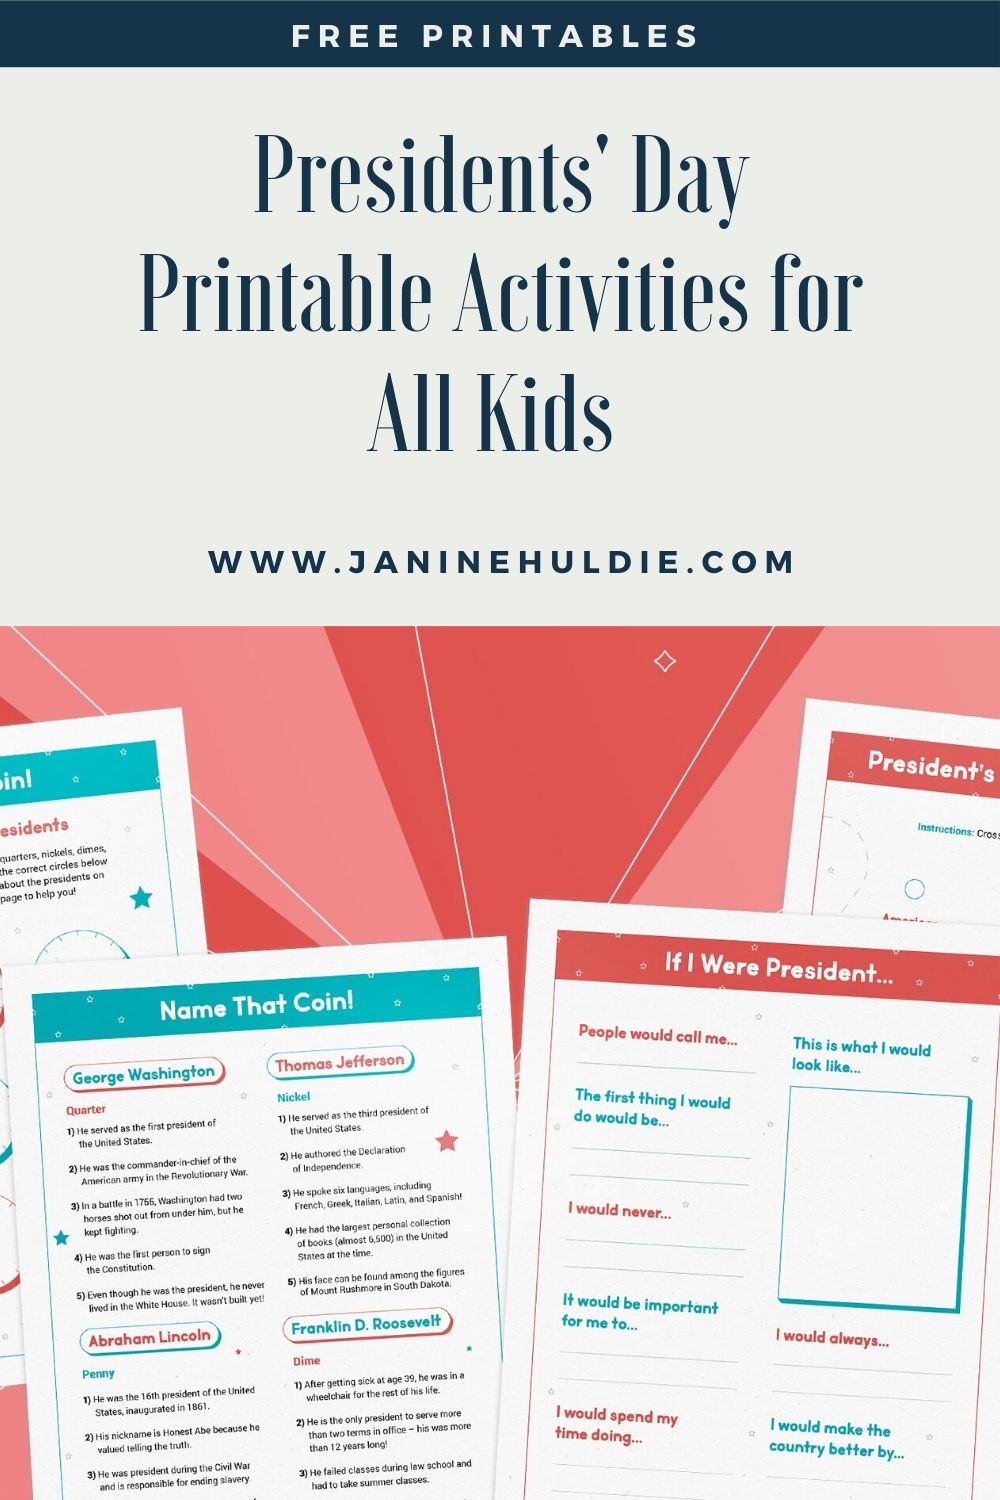 Presidents' Day Printable Activities for All Kids